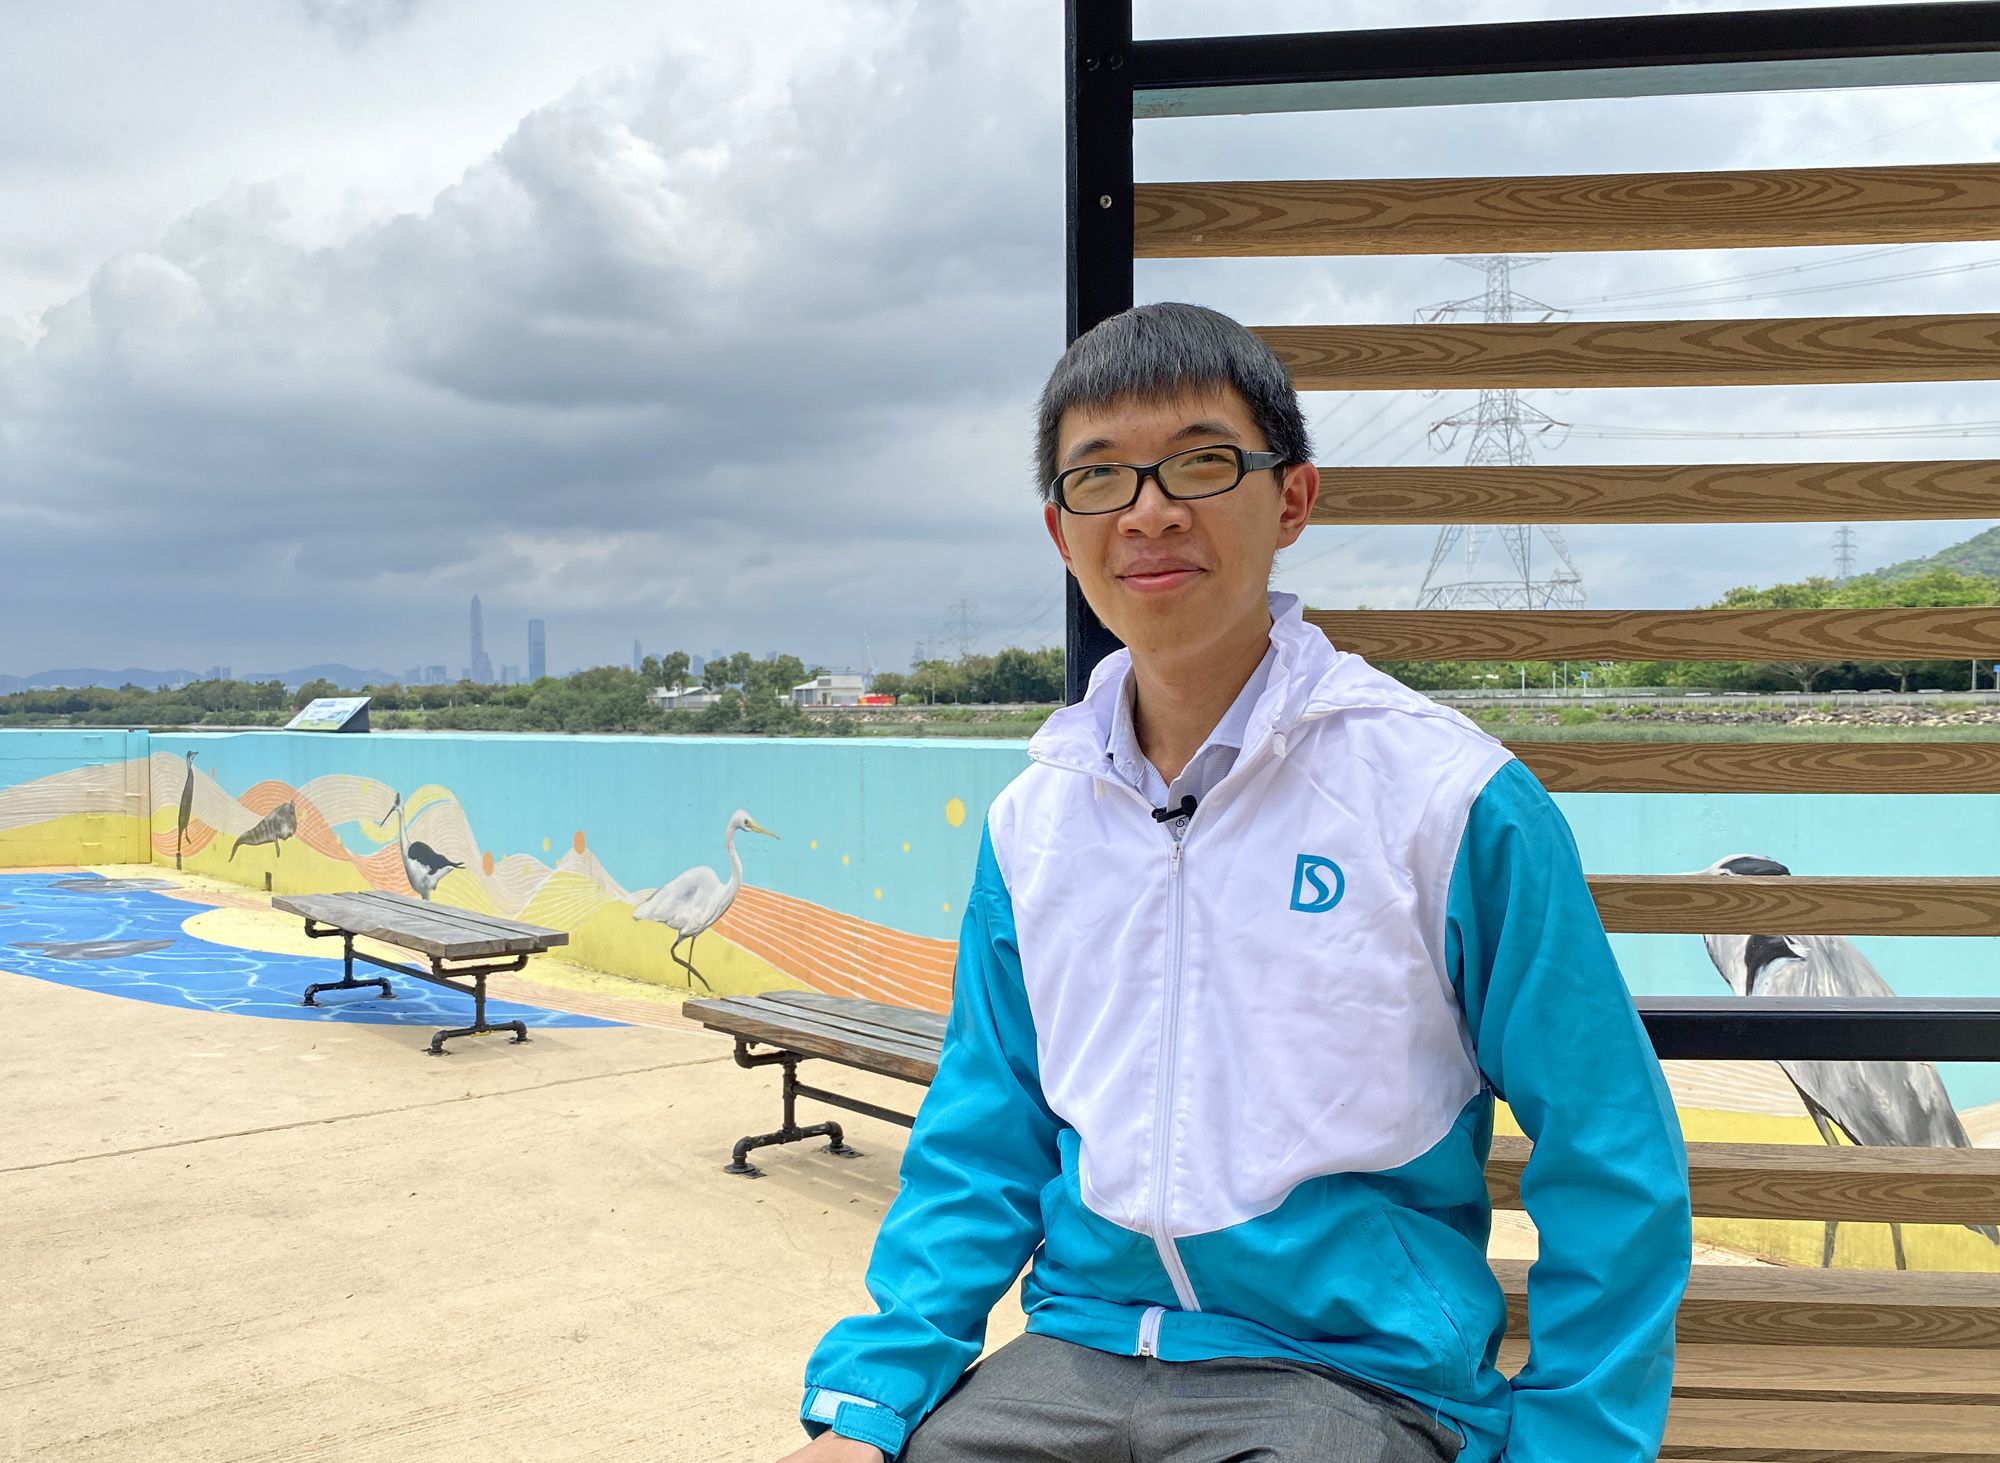 Mr TAI Wai-hin, Engineer (Mainland North Division) of the DSD, says that apart from improving the flood prevention capability of river channels, the DSD has also incorporated more people-oriented design at the riversides to promote a water-friendly culture.